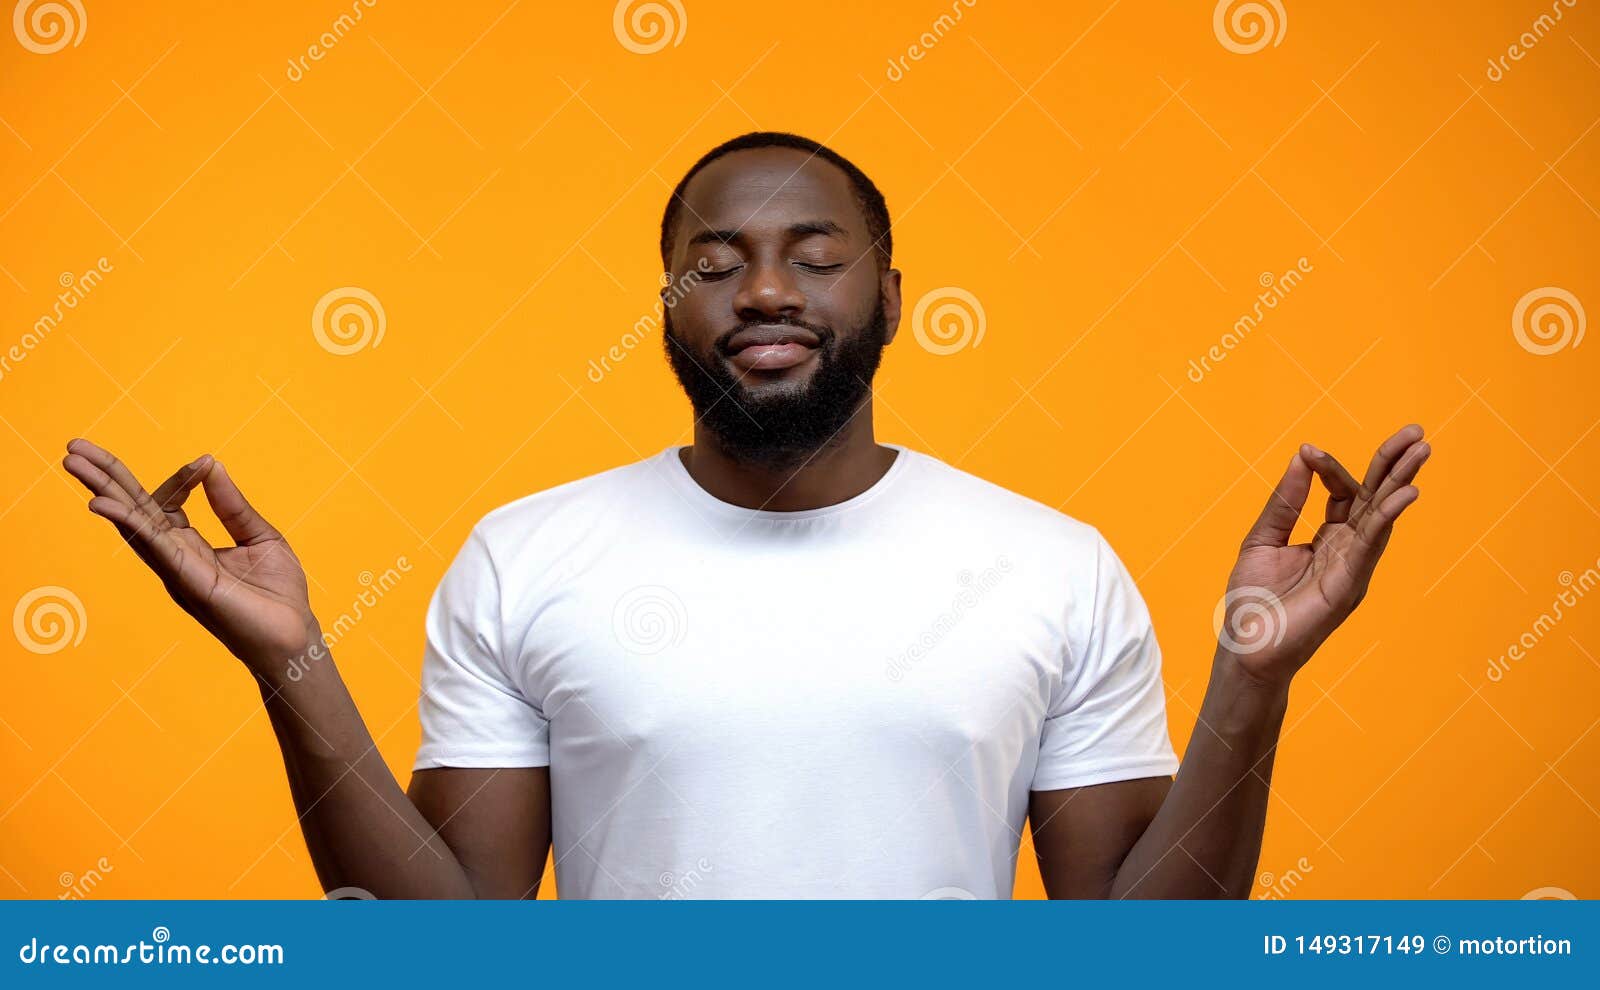 pacified black man meditating against yellow background, breathing exercises